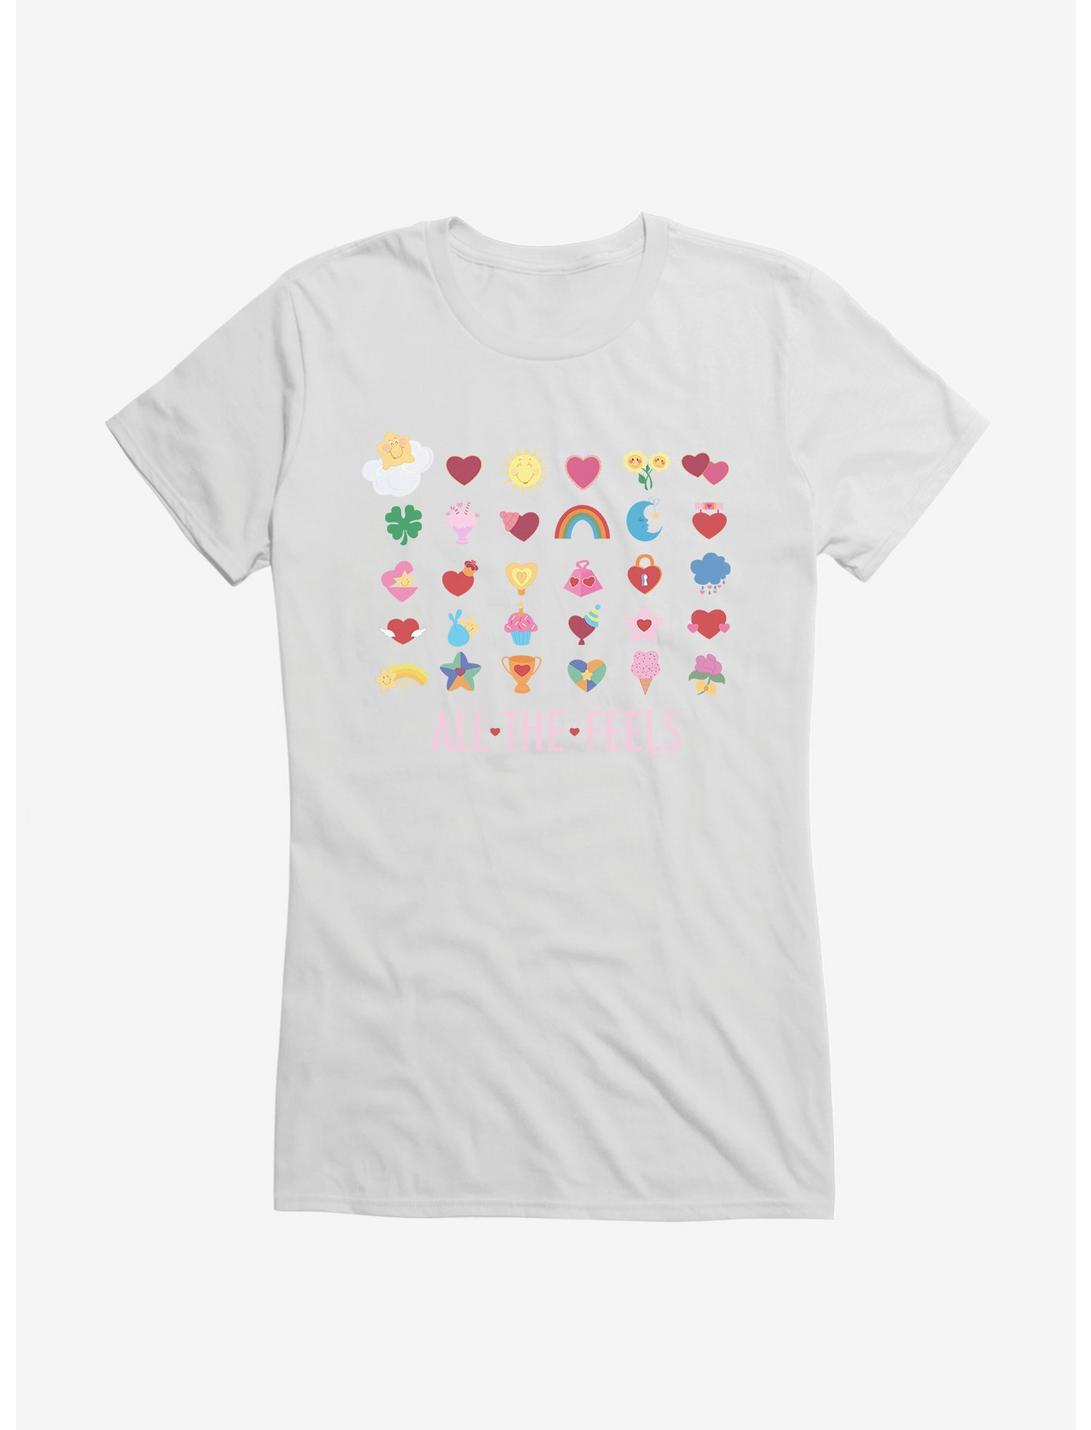 Care Bears All The Feels Girls T-Shirt, , hi-res